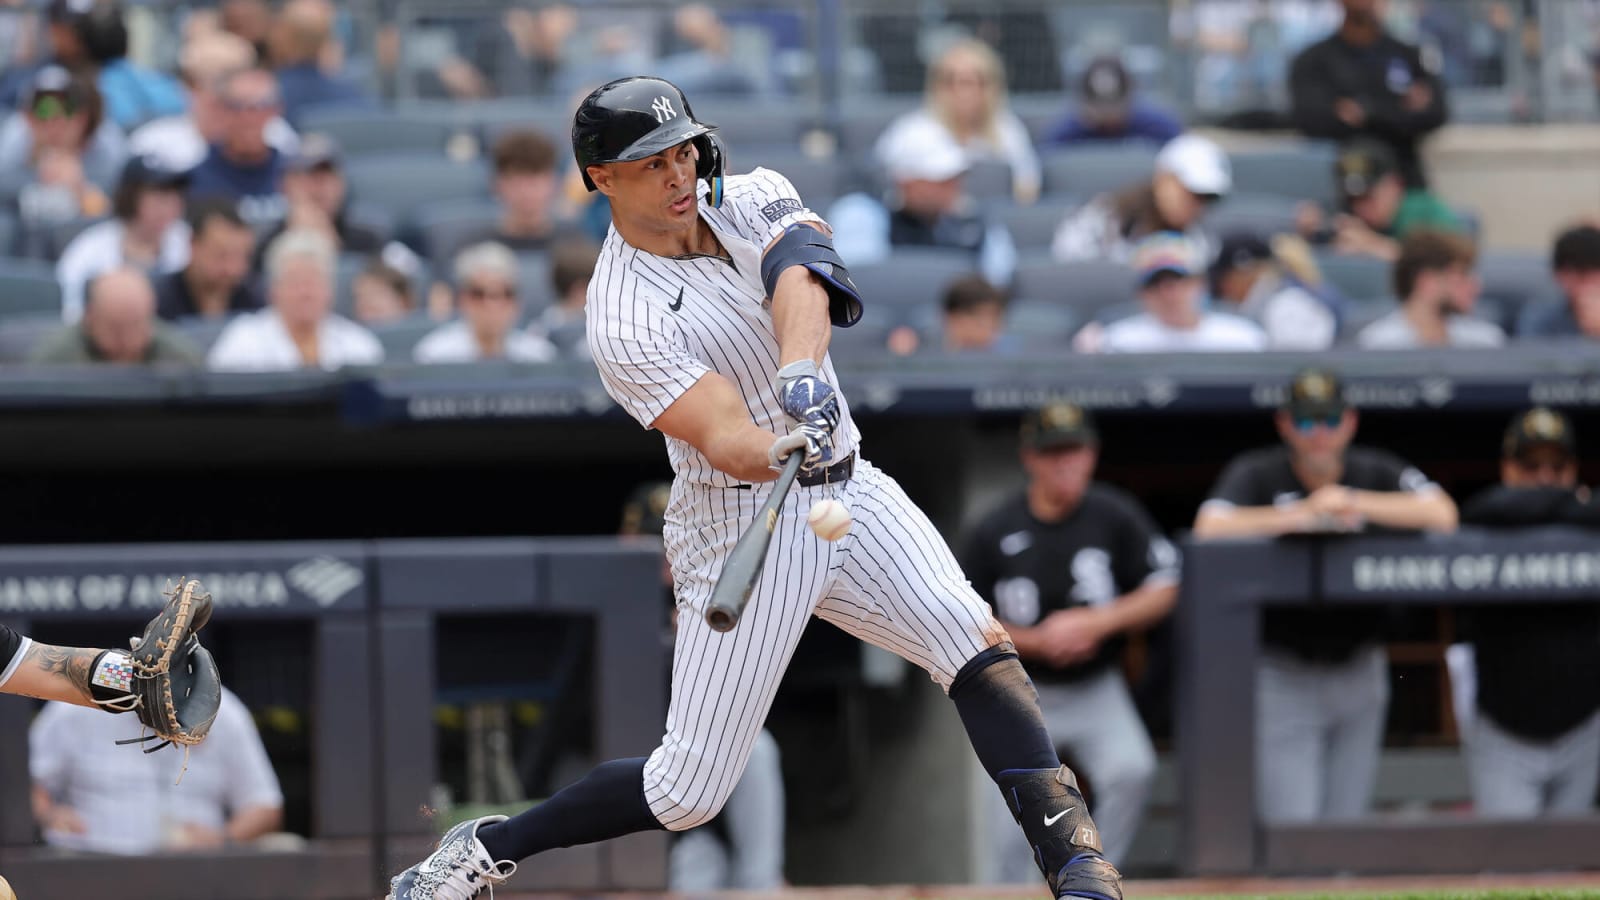 Yankees have taken a very odd approach to their batting order, and it’s working